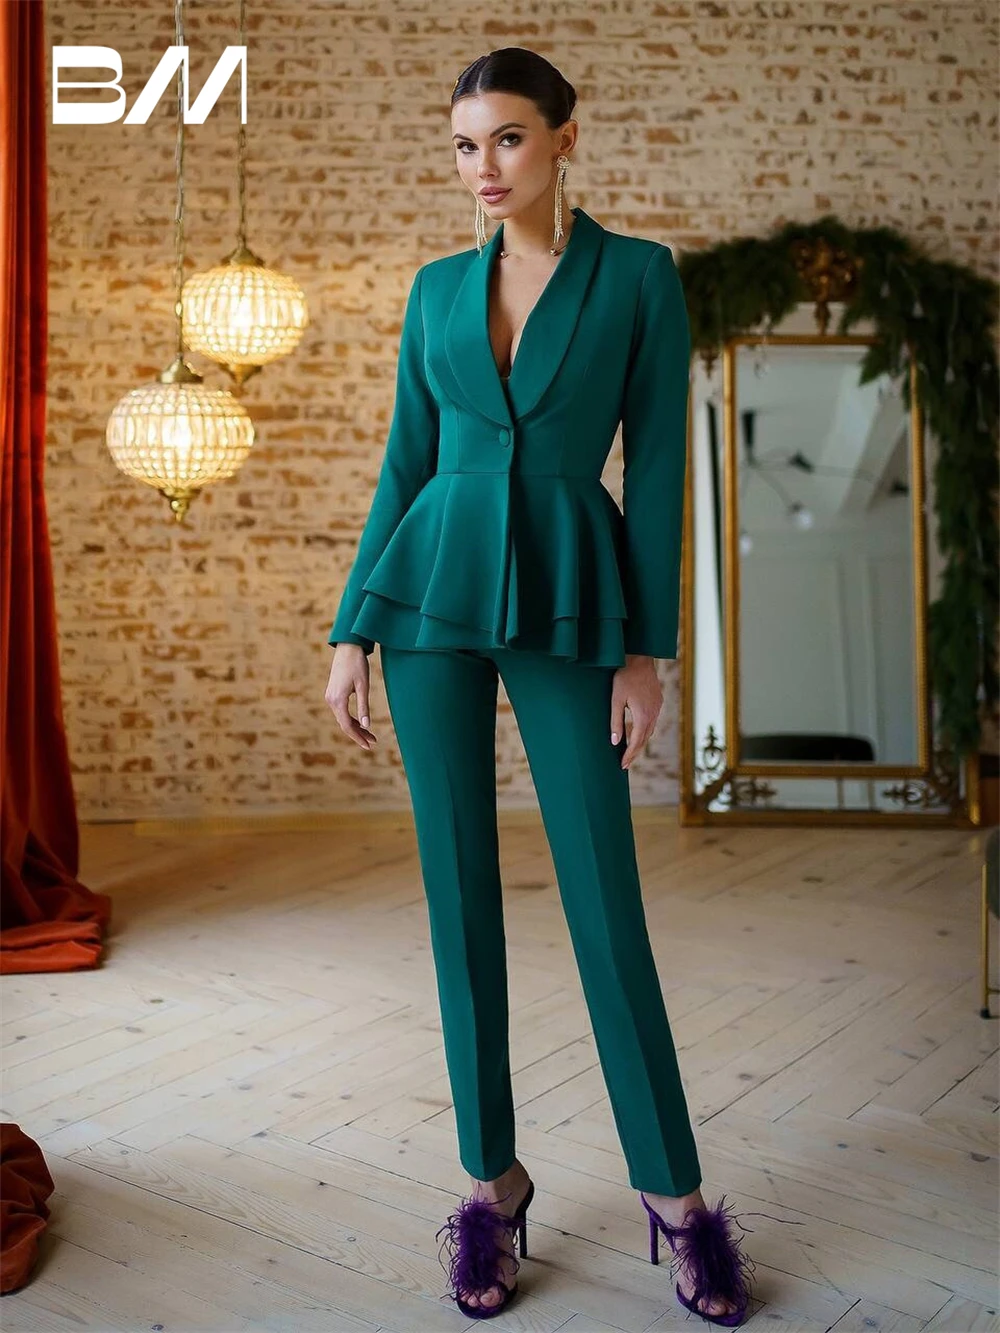 Pink Two Piece Flare Women Suit Set Blazer Pants Solid Formal Wedding Party Dress Wear Office Business Outfit Plus Size